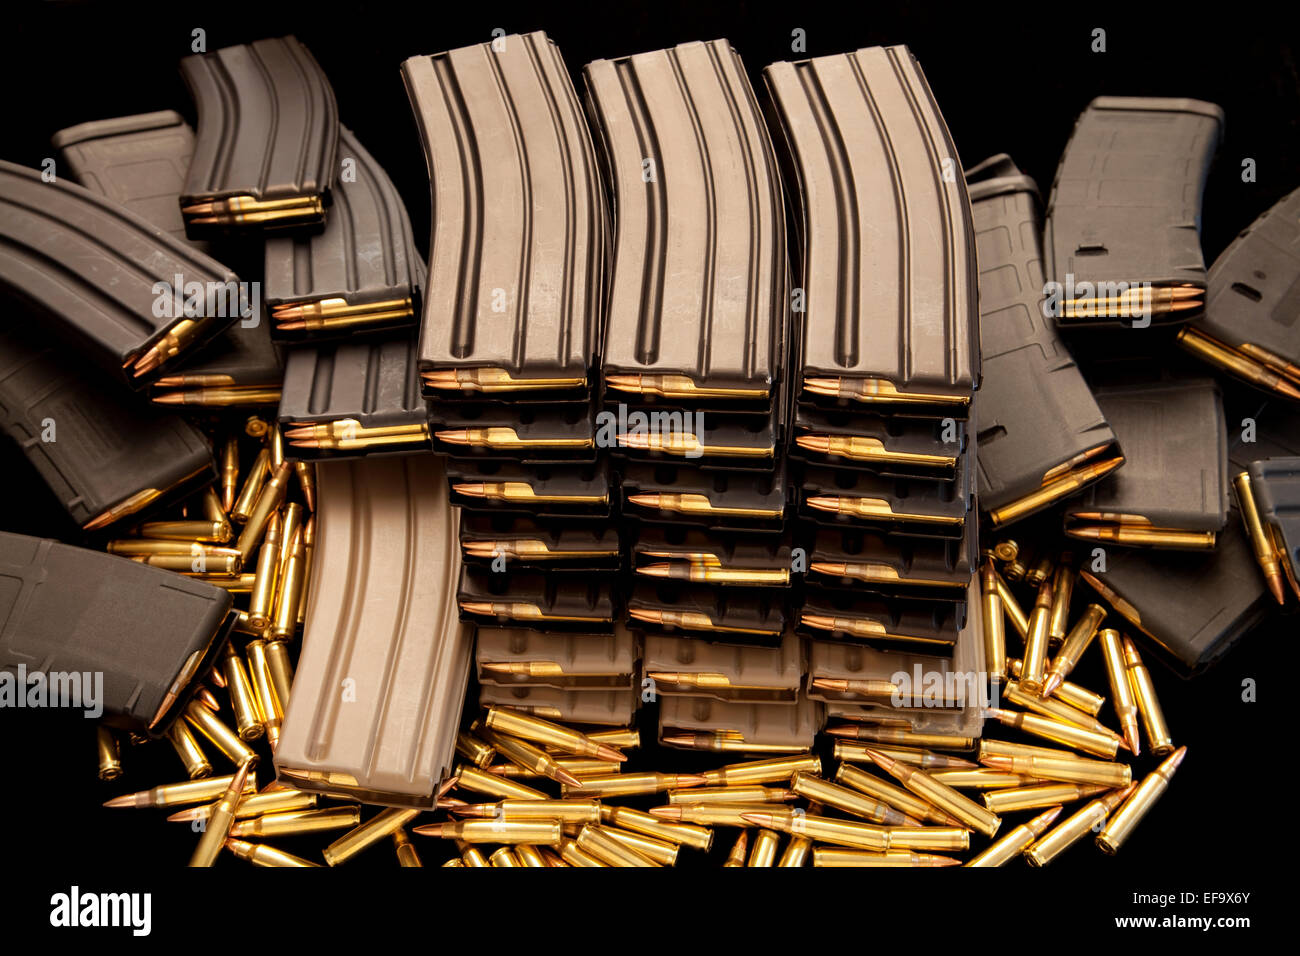 High capacity ammunition magazine clips filled with live 5.56mm .223 ammo Stock Photo